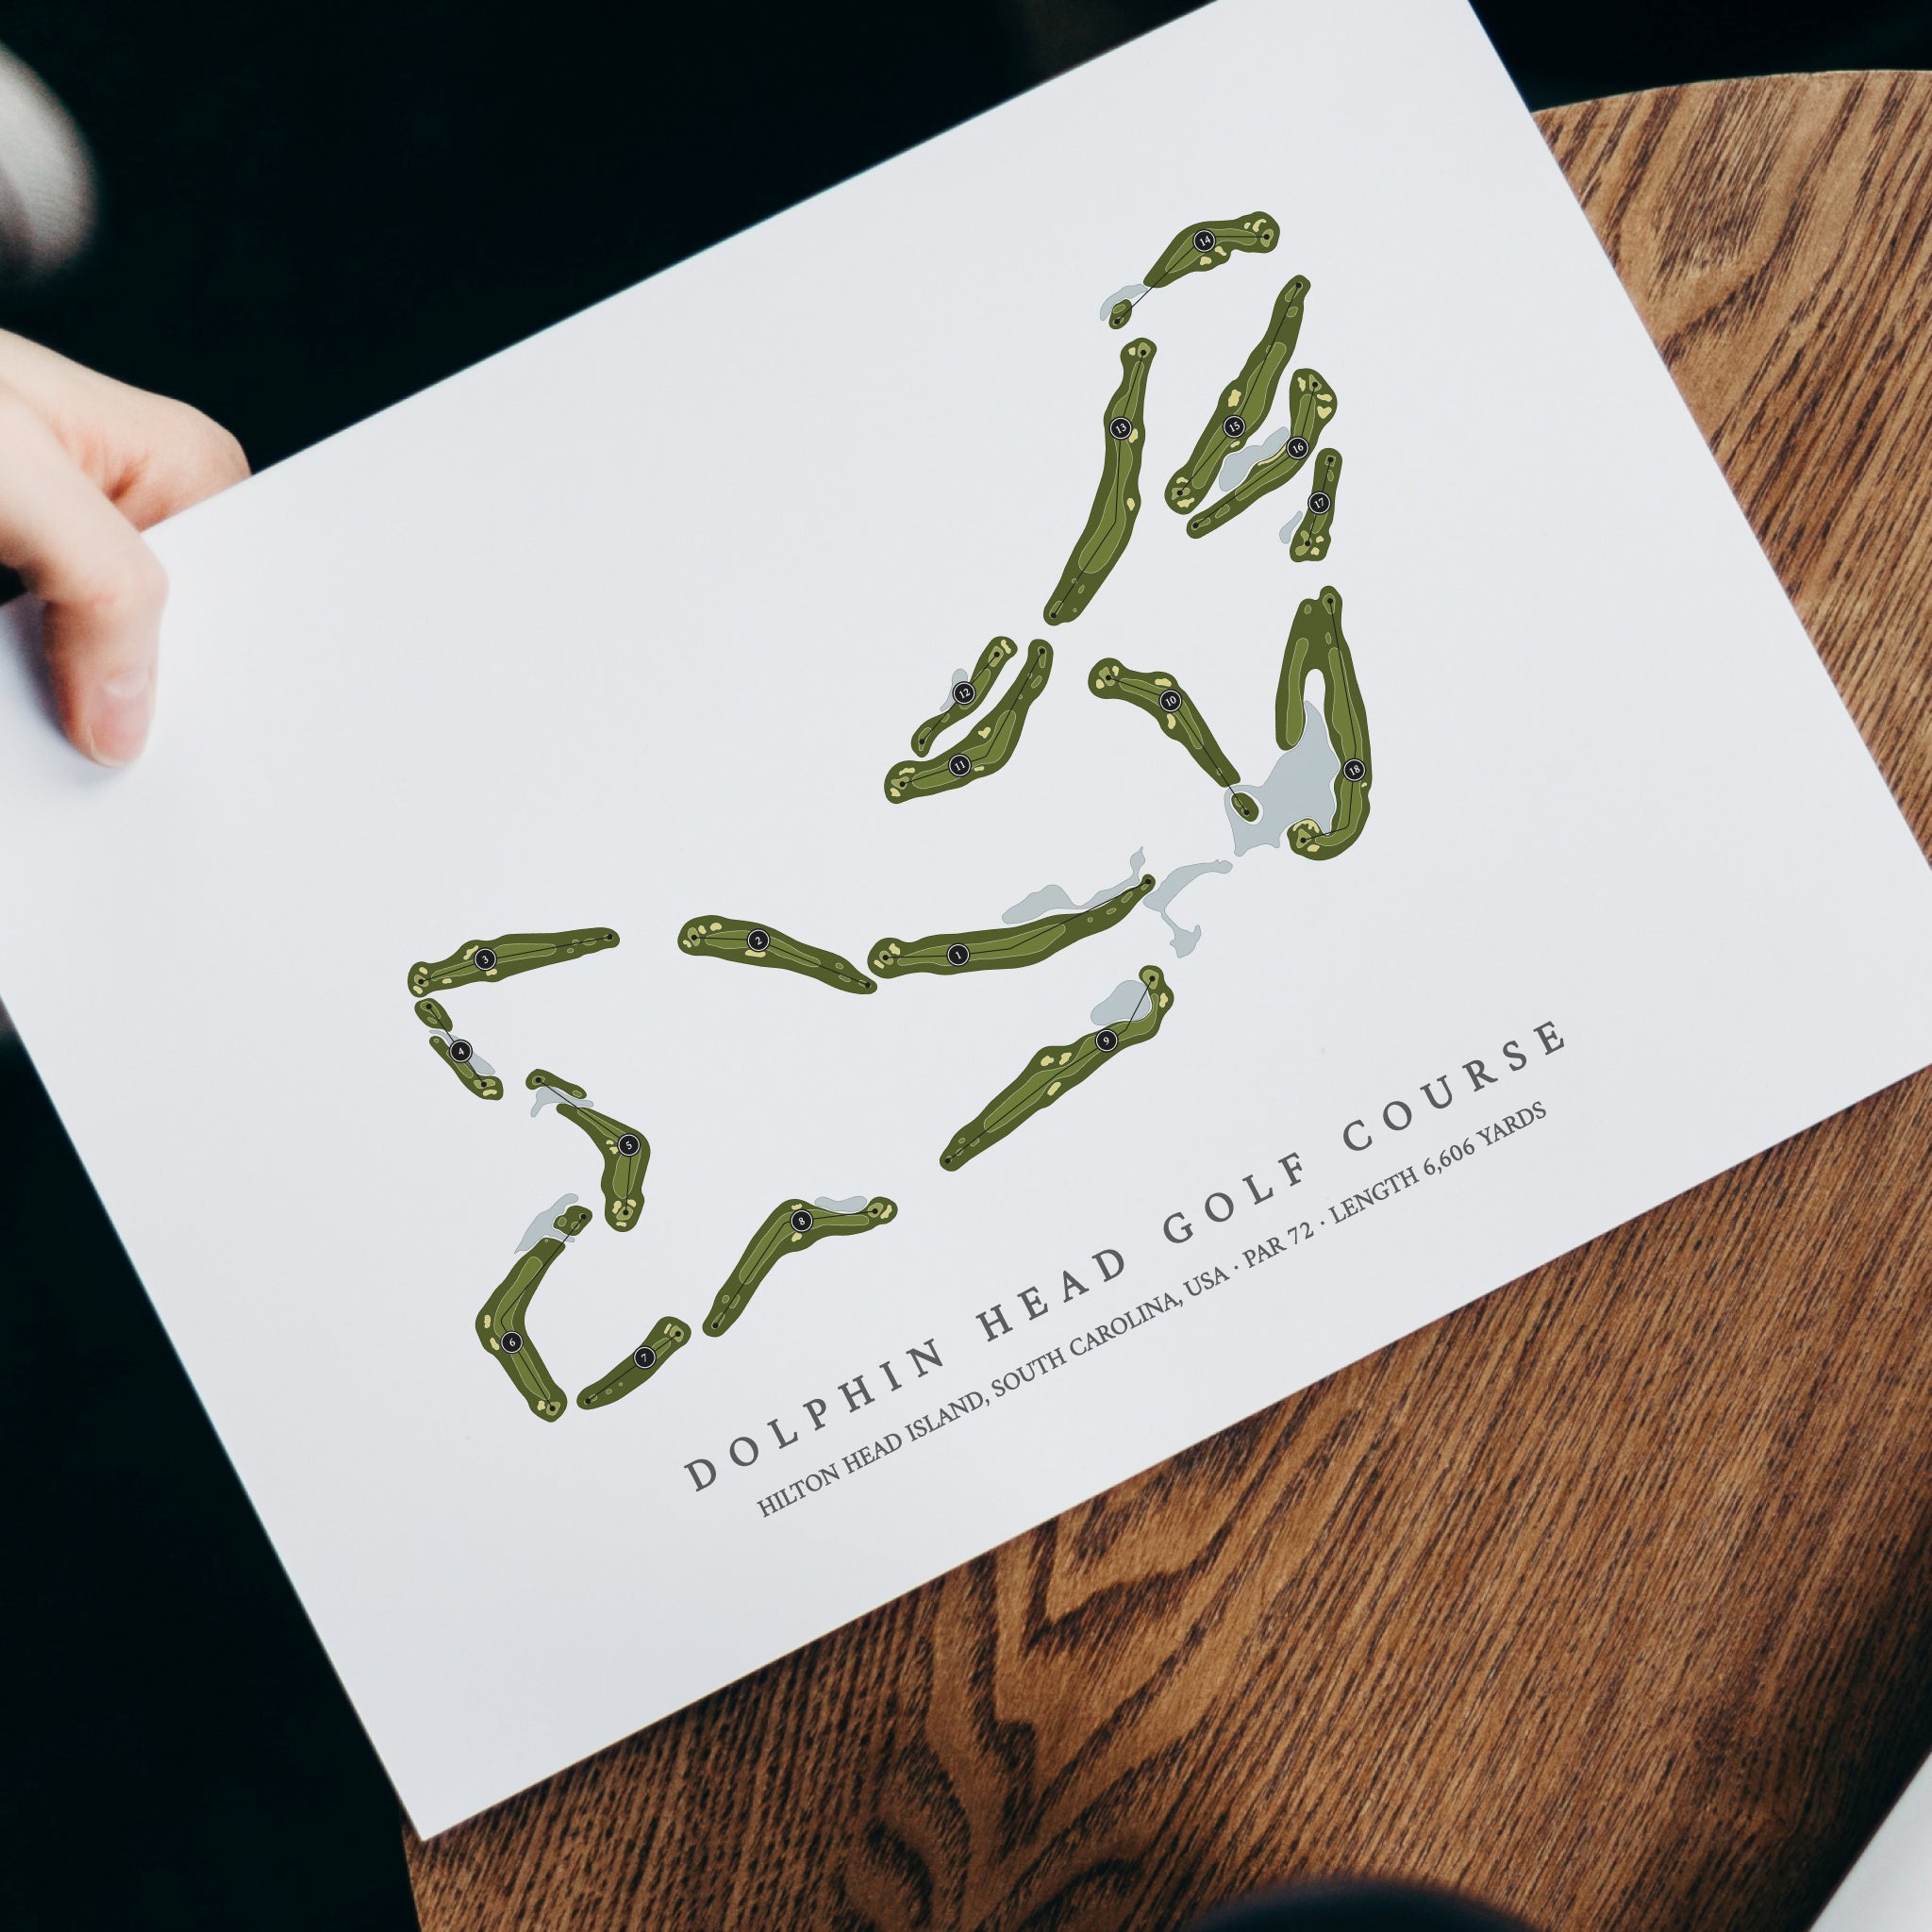 Dolphin Head Golf Course | Golf Course Print | With Laptop 